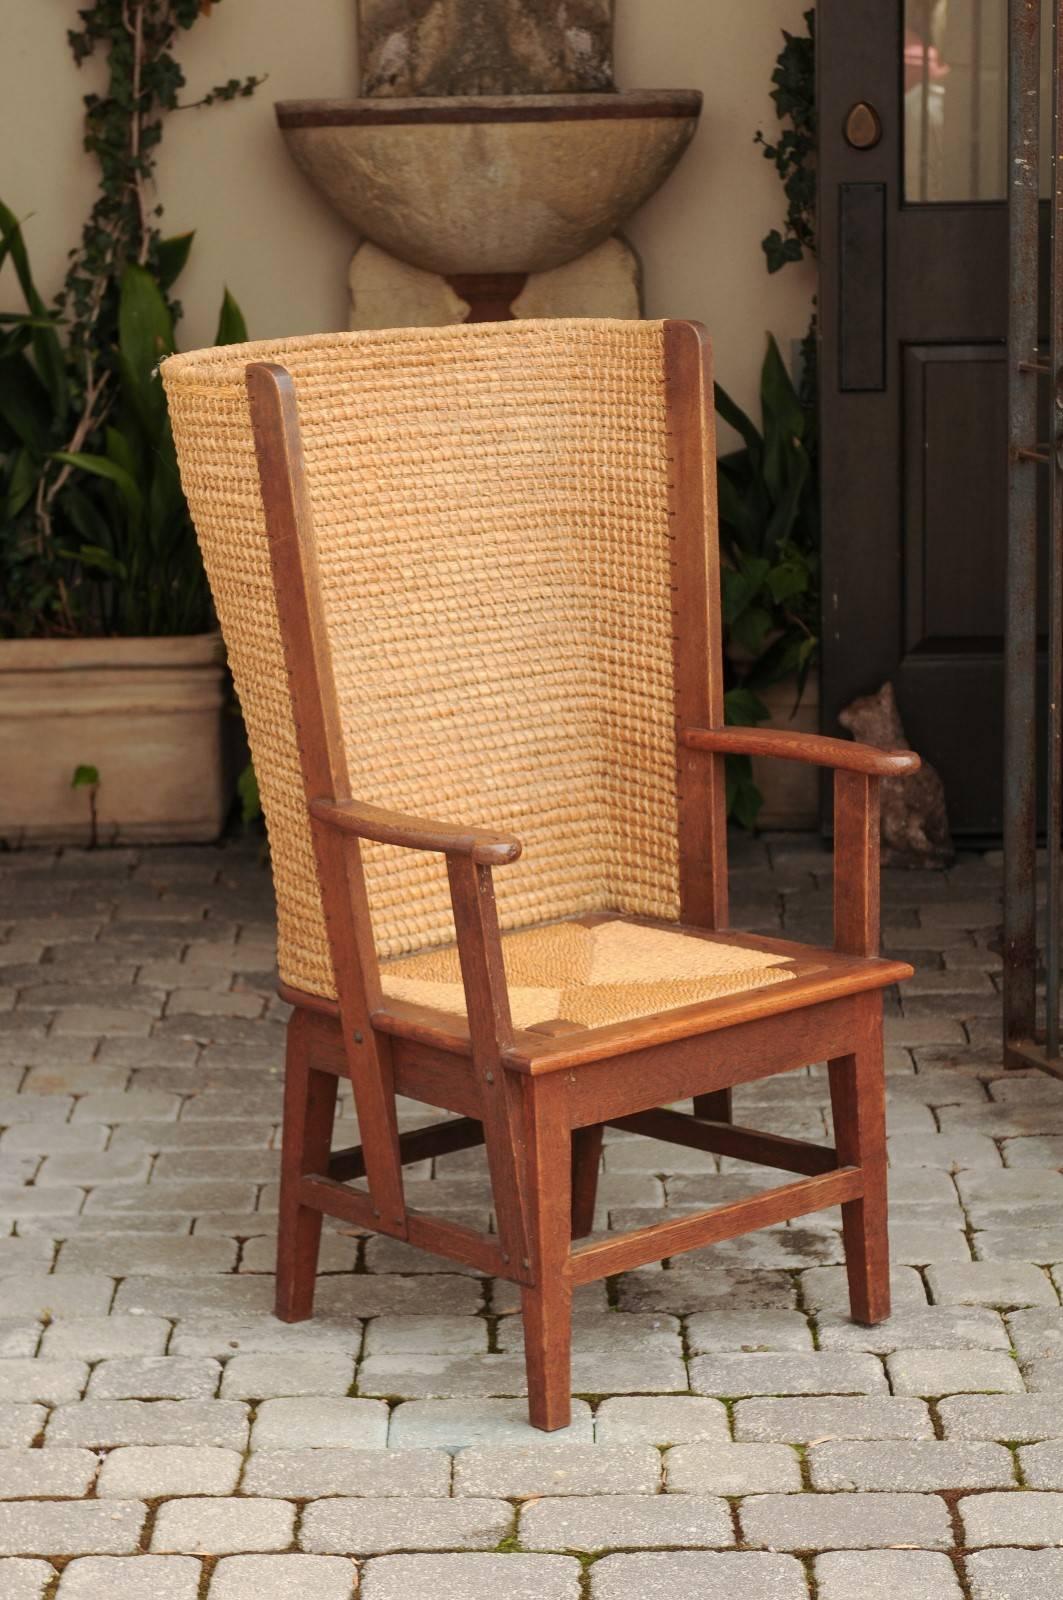 A Scottish Orkney chair with handwoven wrap around straw back, wooden arm supports without-scrolled extremities, straight legs and side stretchers from the late 19th century. This wooden and straw chair was born in the Orkney Islands near the